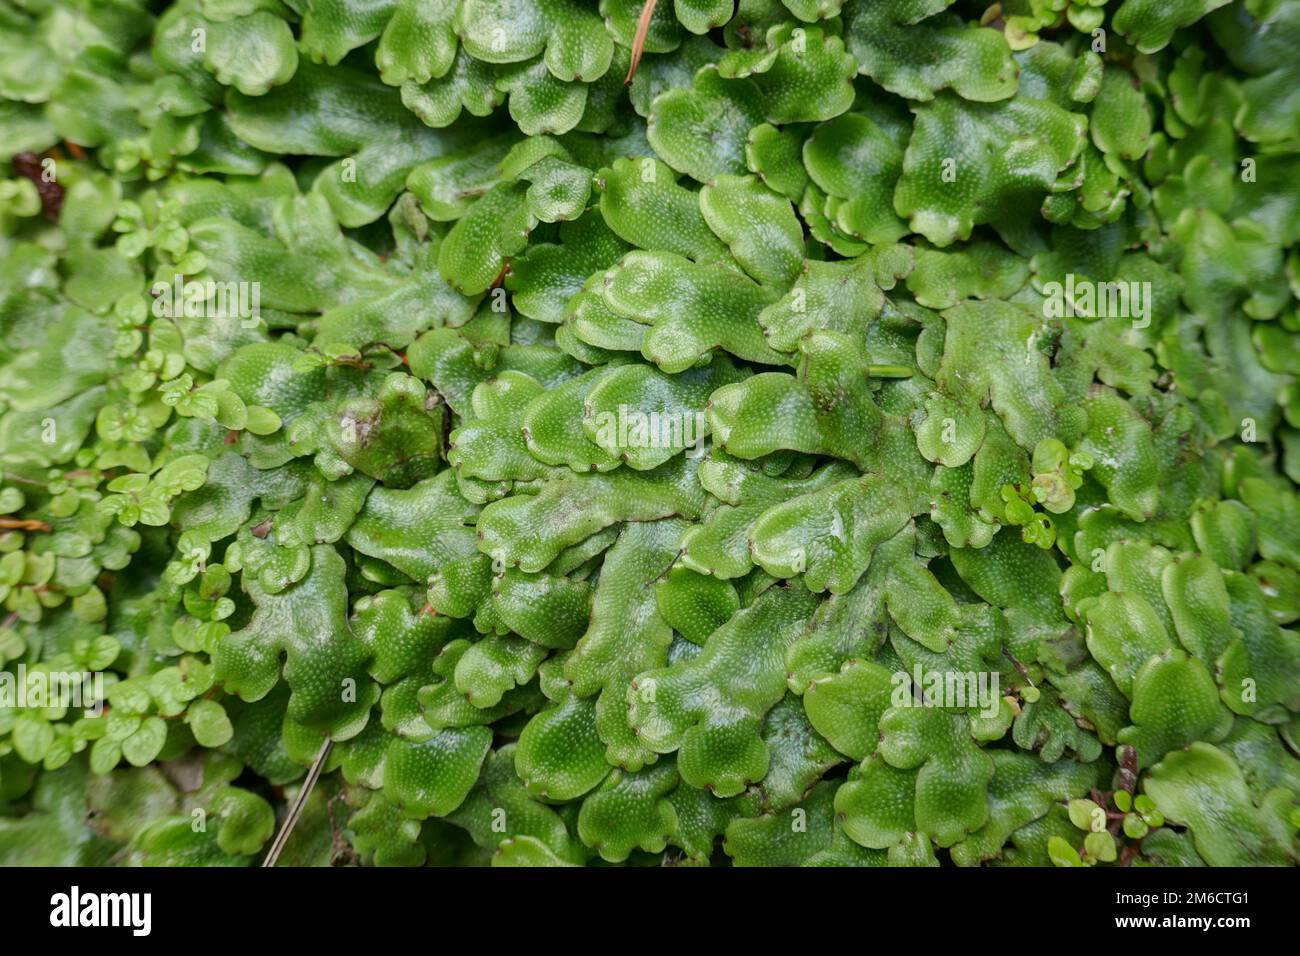 Thick covering of lush green liverwort plant Stock Photo